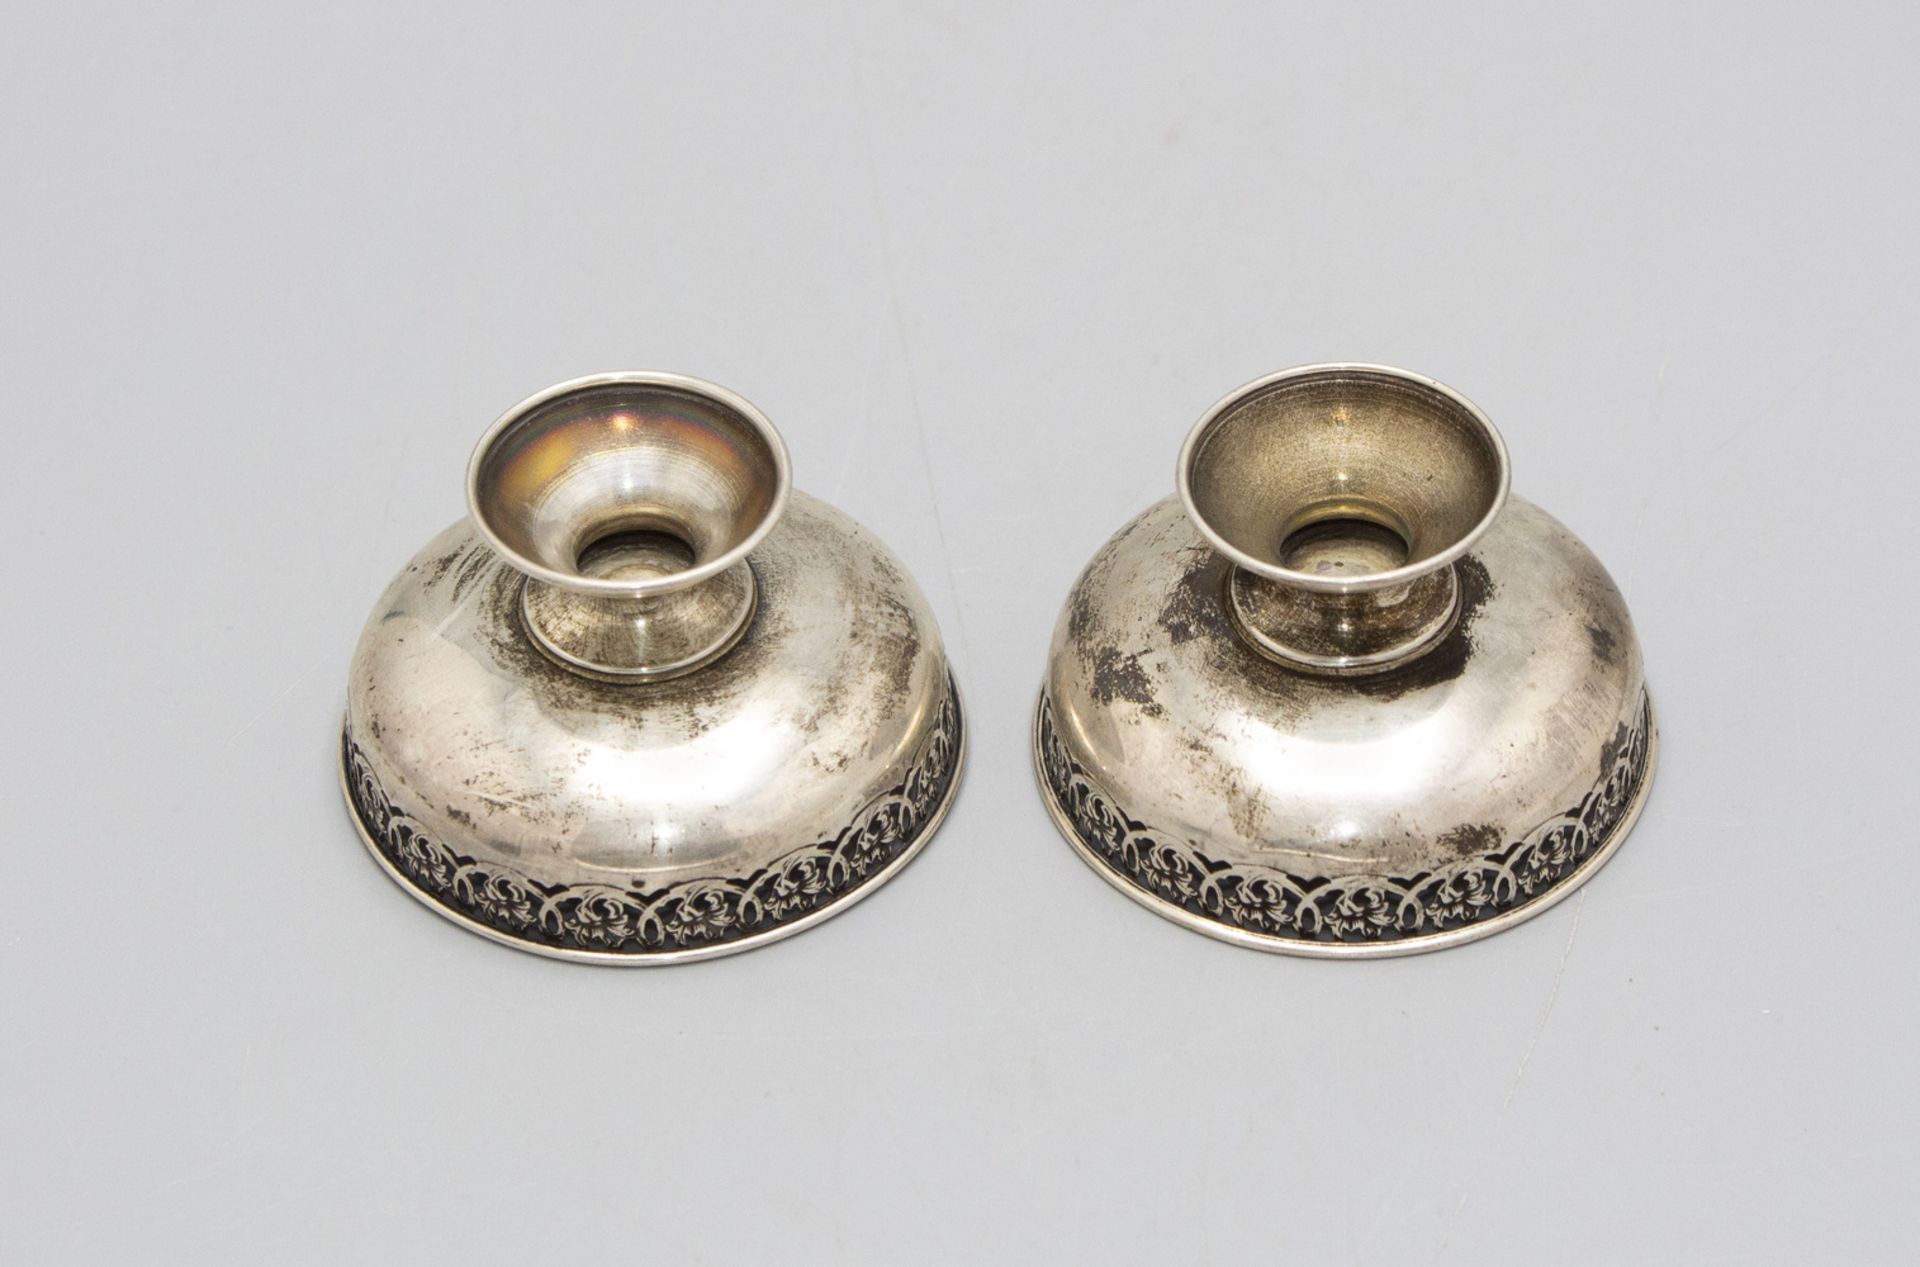 Paar Fußschälchen mit Blumenbordüre / A pair of small footed Sterling silver dishes with ... - Image 2 of 4